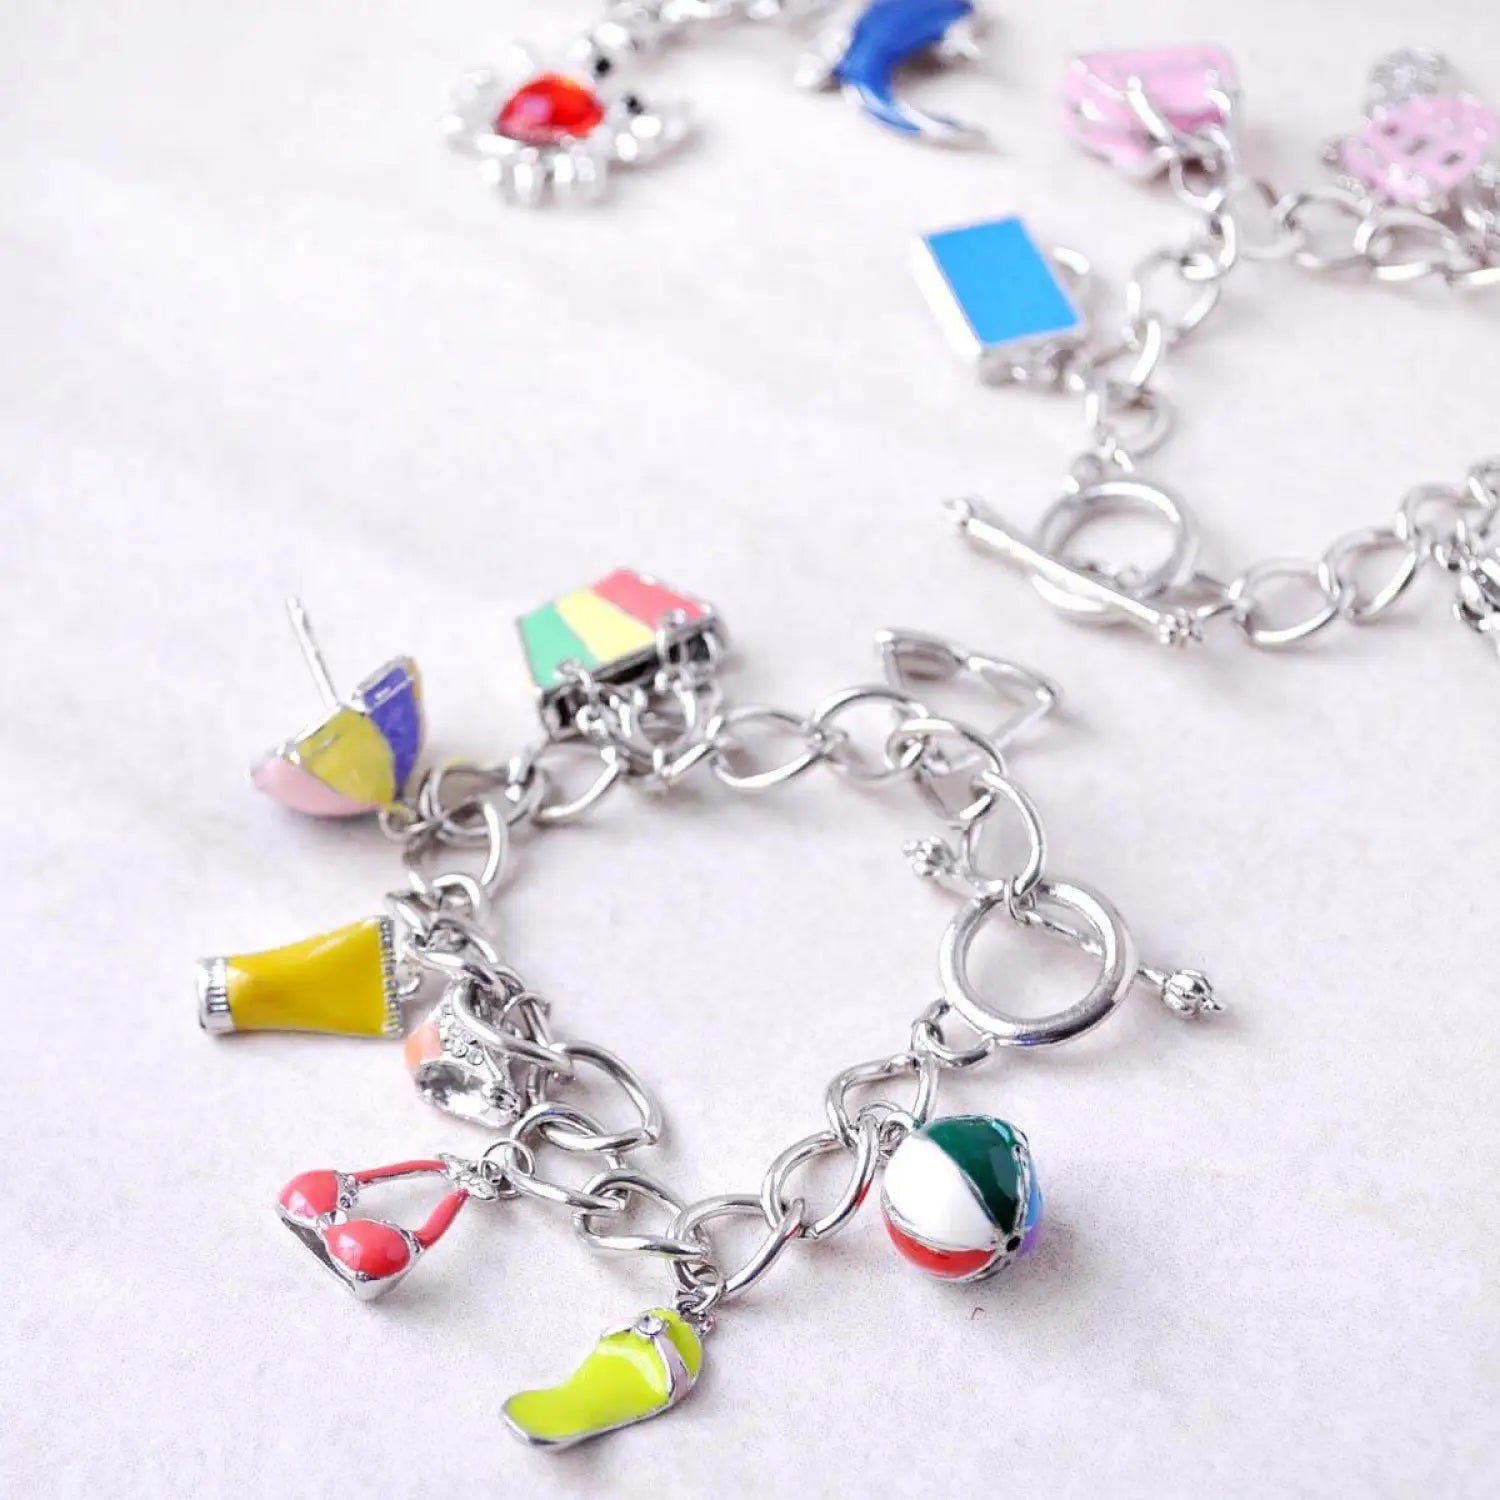 Colorful charm bracelet from 3 Pack Metal Charm Bracelets - Your Perfect Summer Accessory.